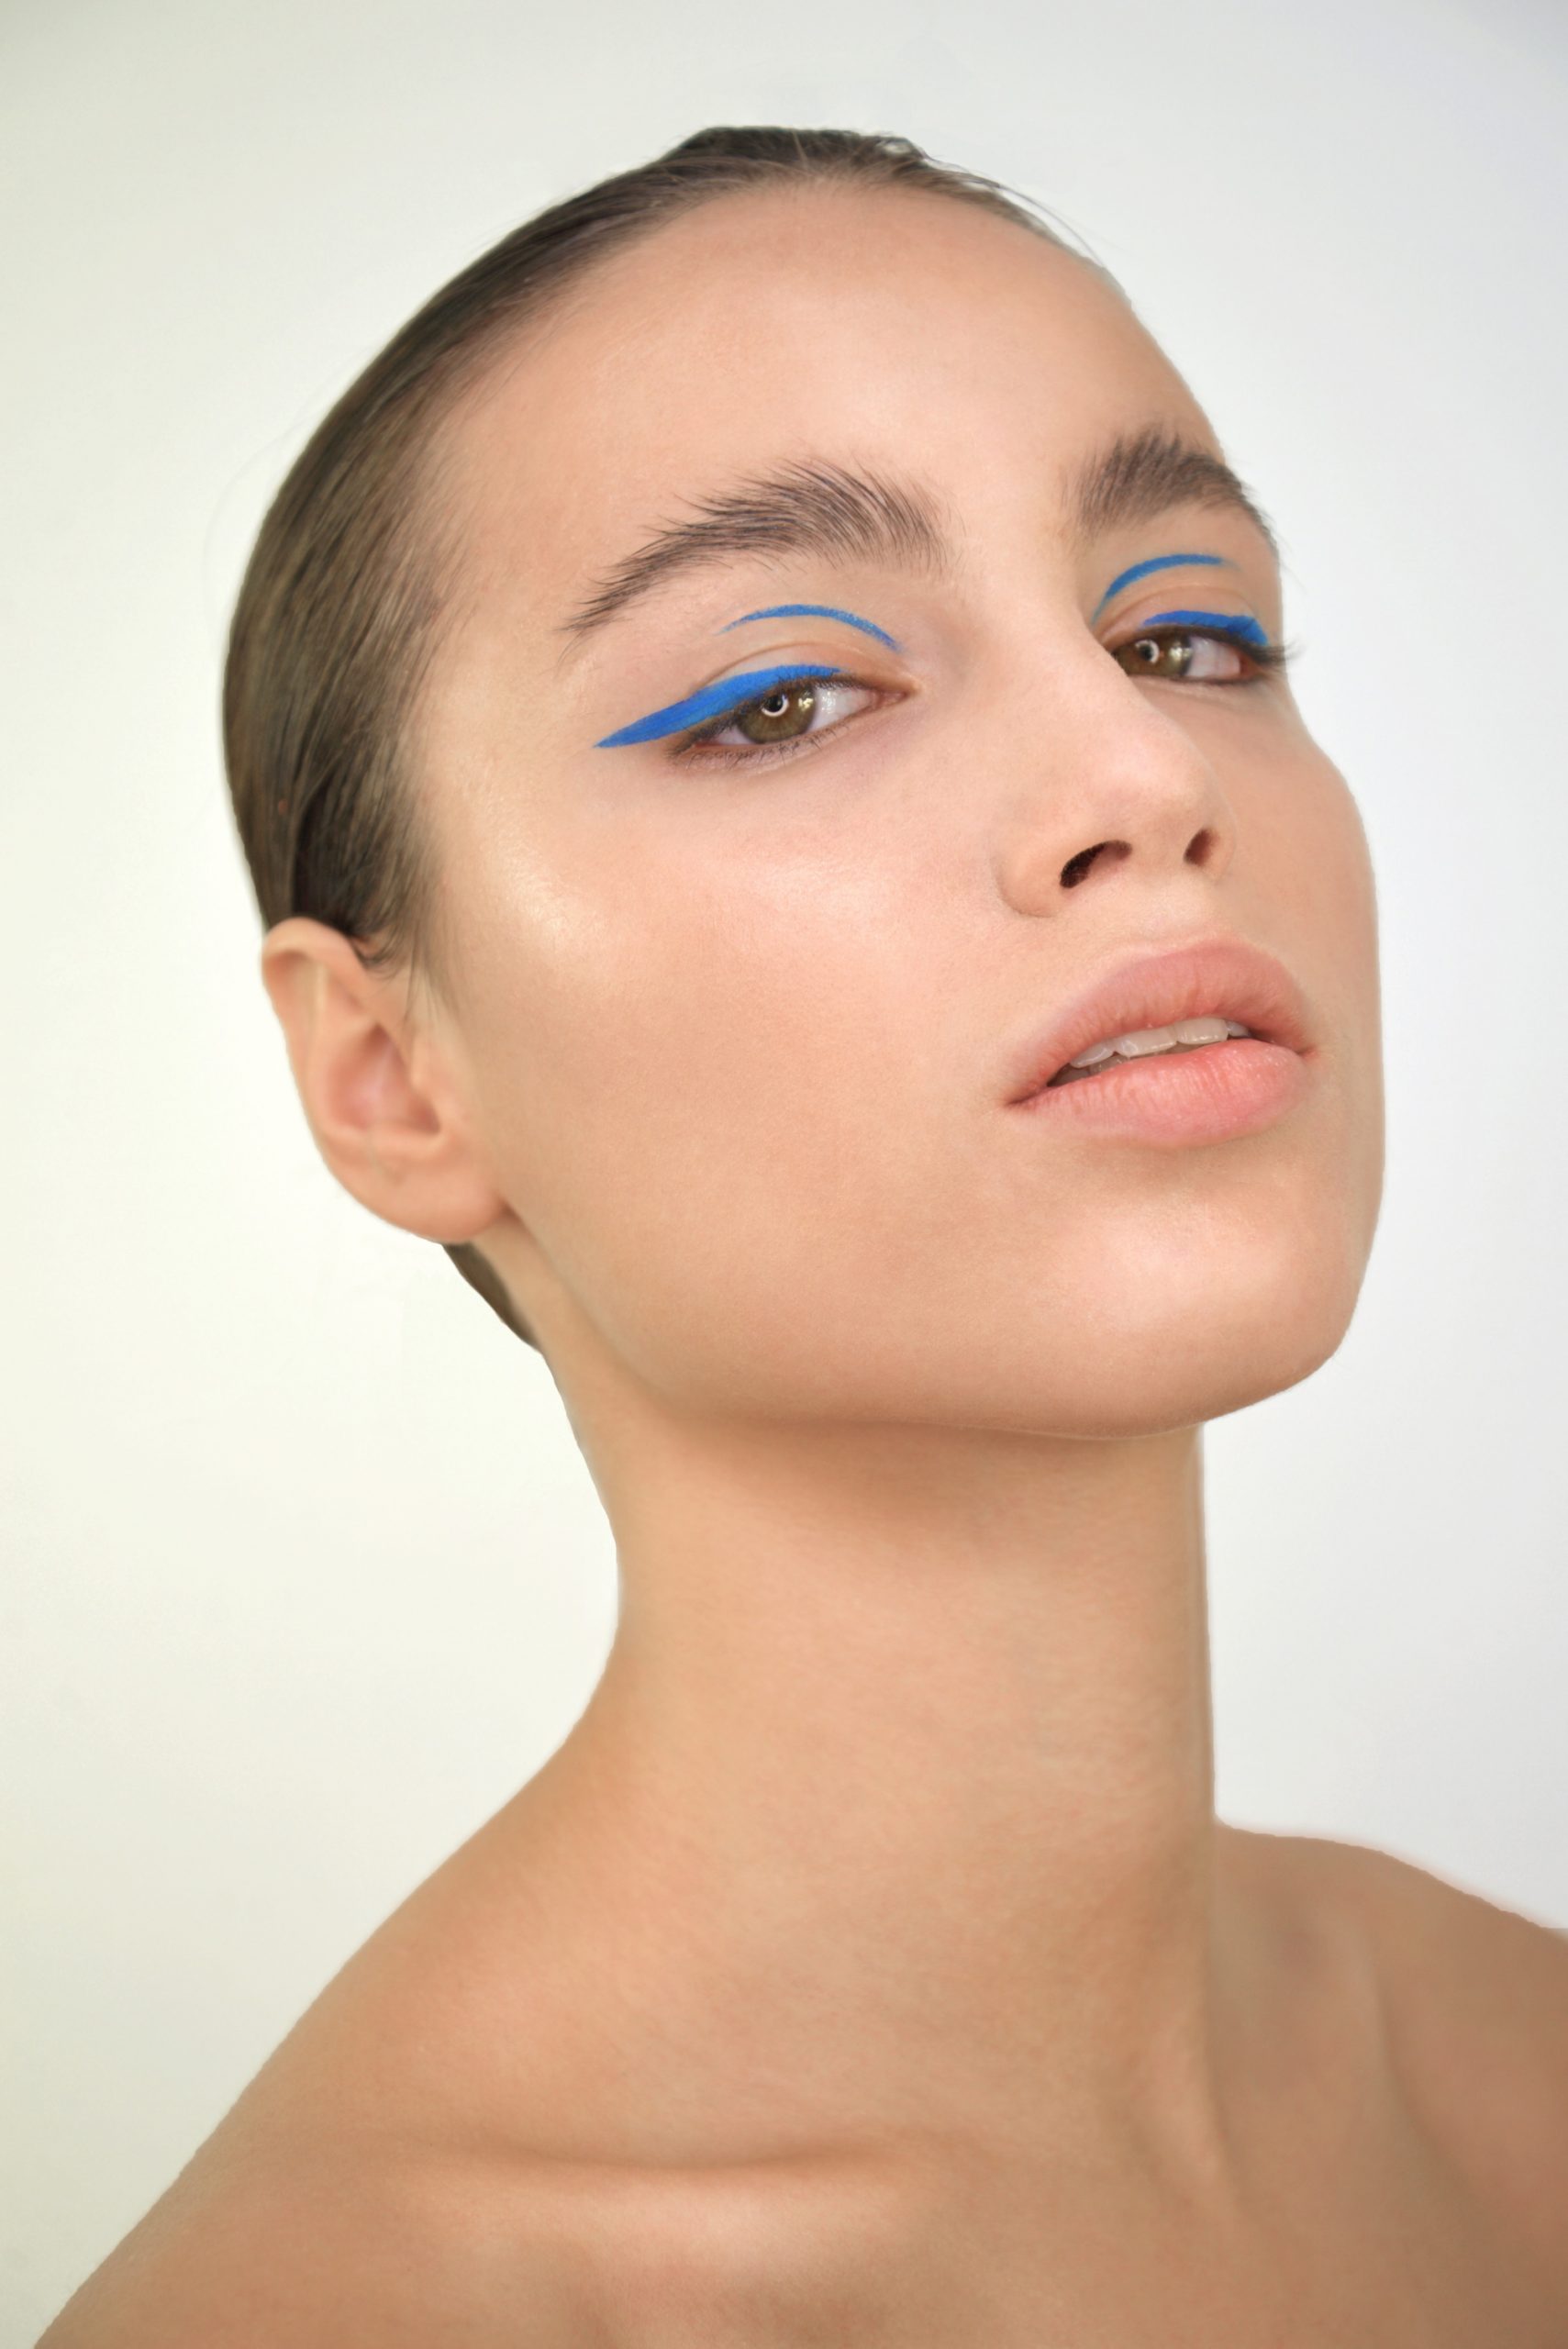 Extravagant beauty: Graphic Eyeliner by Daniel Domika